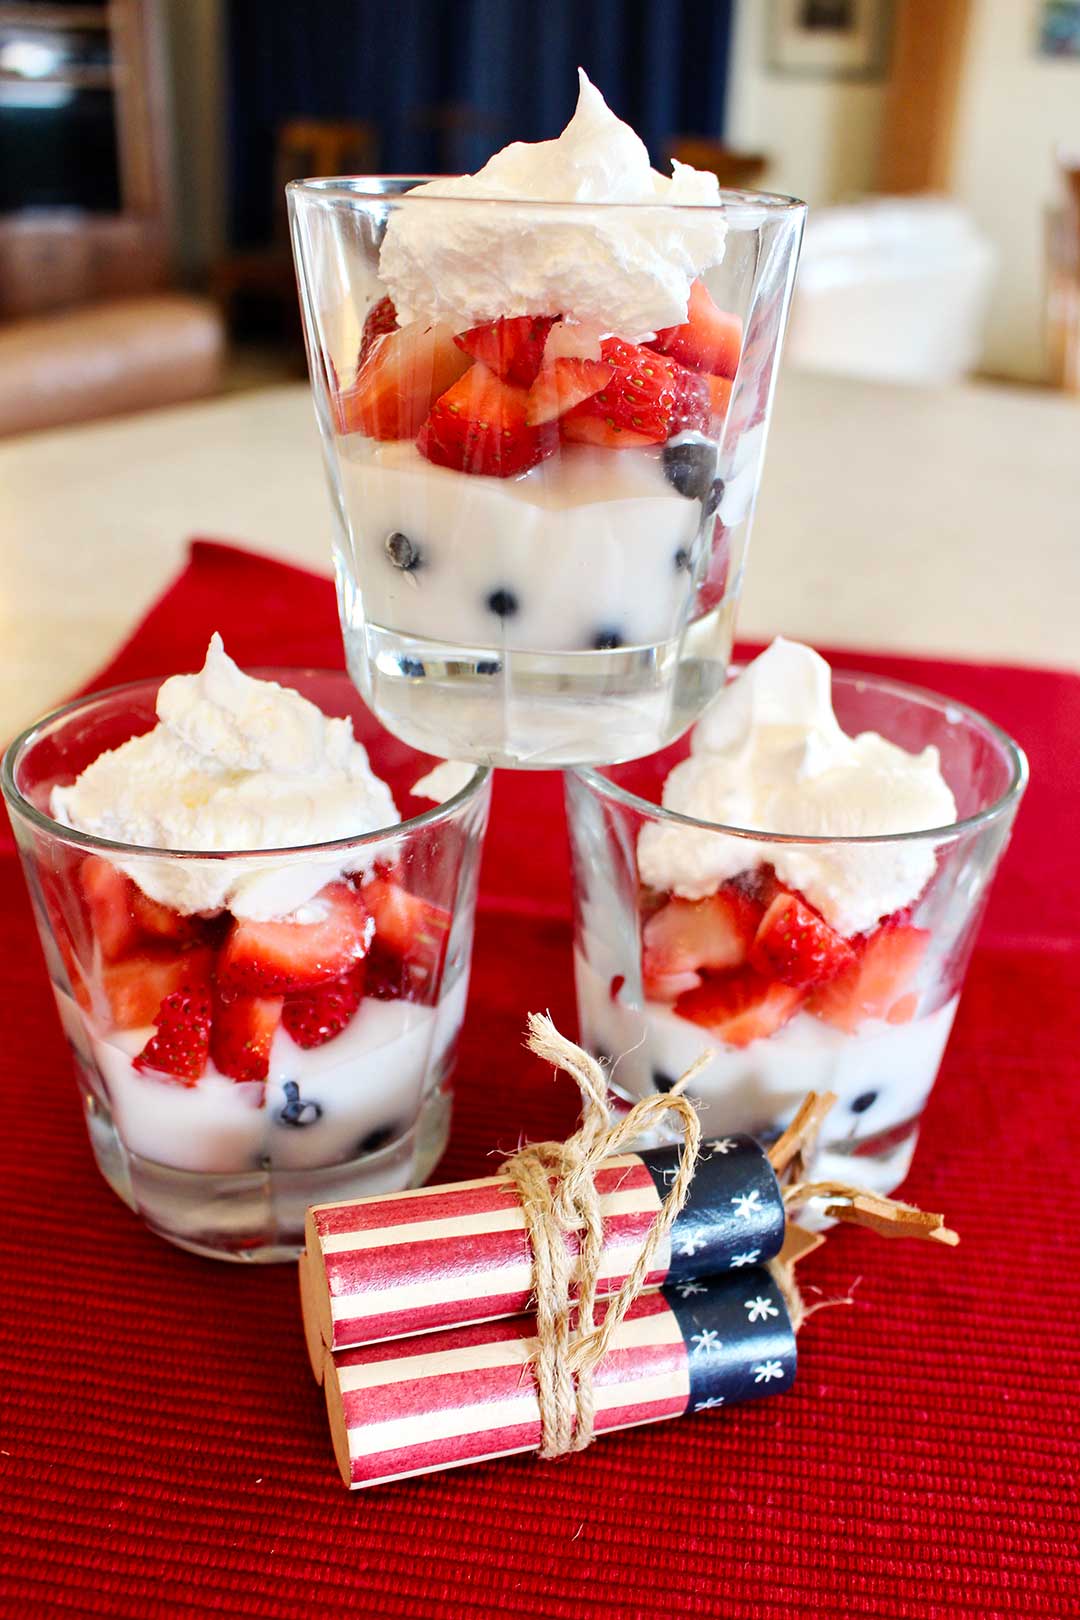 Red white and blue fruit parfaits with blueberries, strawberries, and whipped cream.